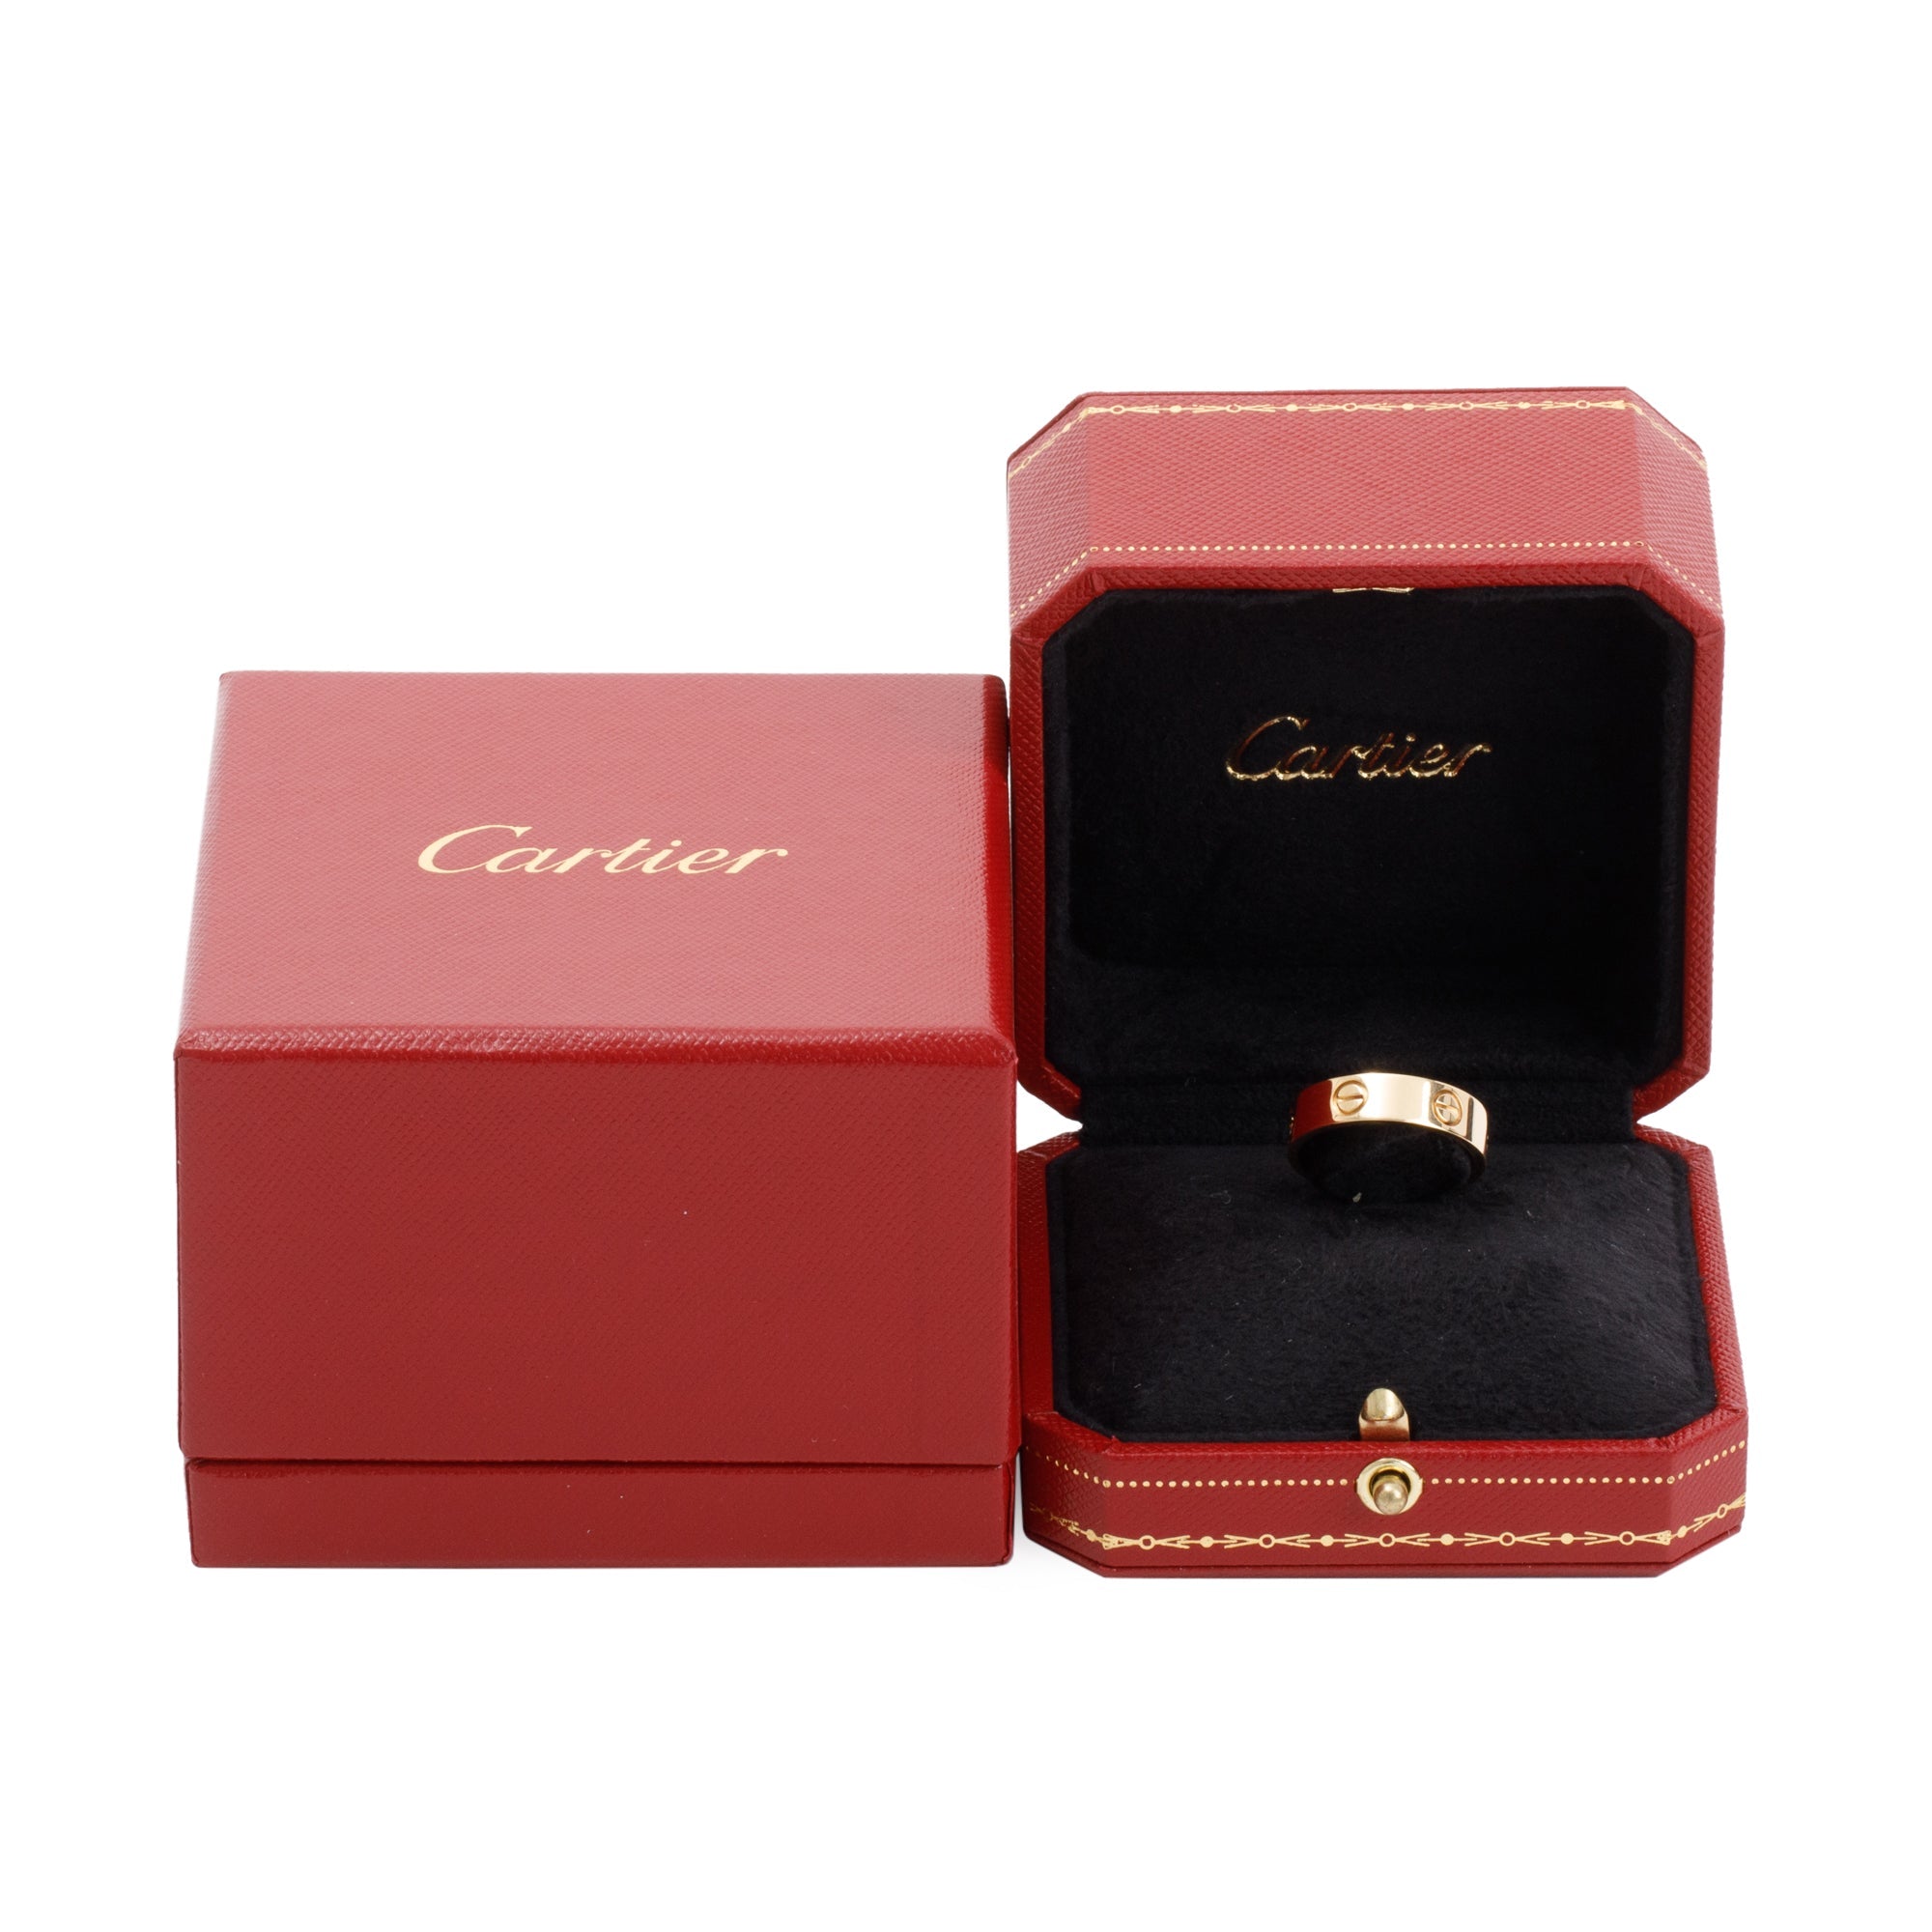 Cartier 18k Yellow Gold 5.5 MM Love Ring, Size 57 8 w/ Box